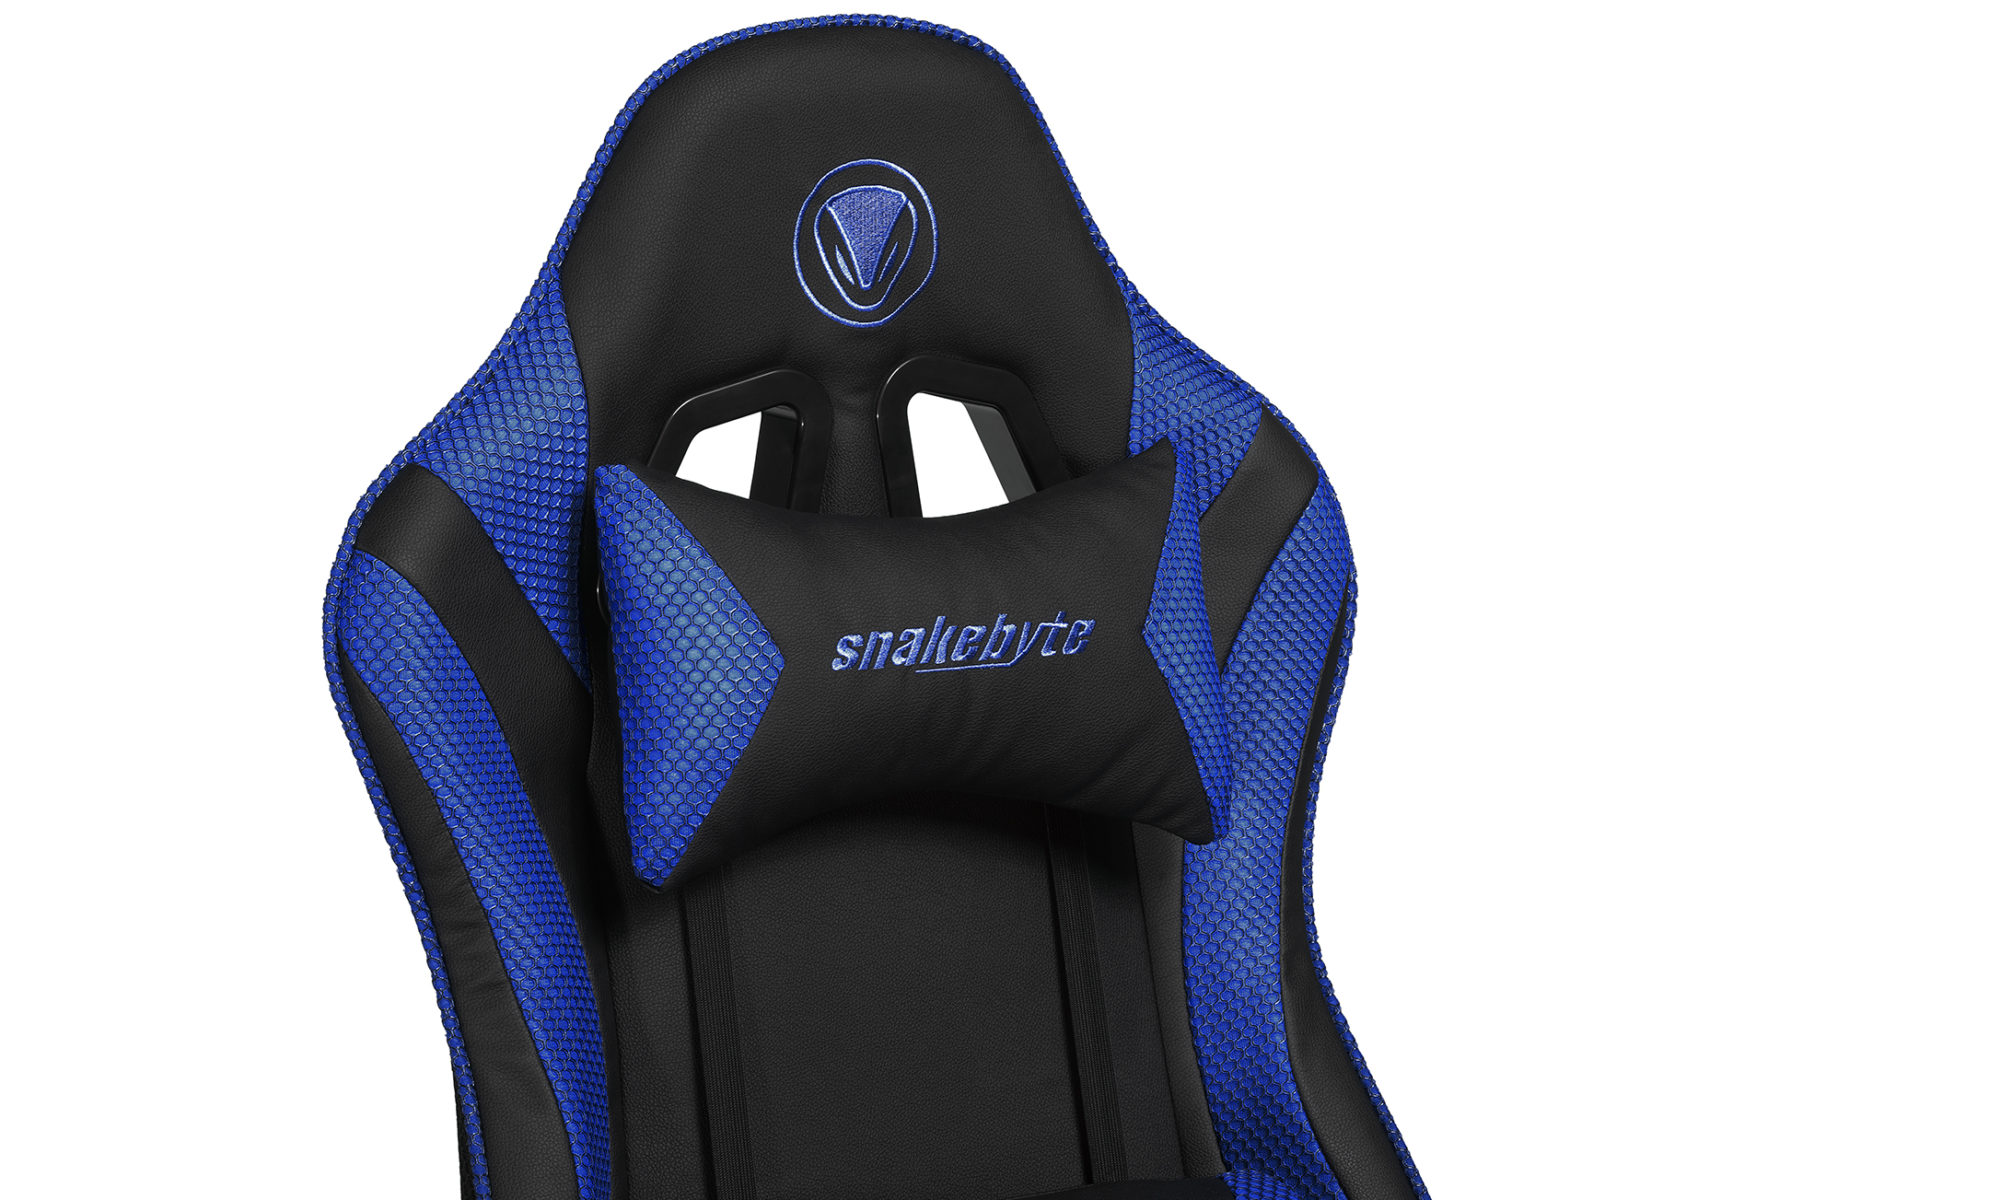 Snakebyte Gaming Chair Pro